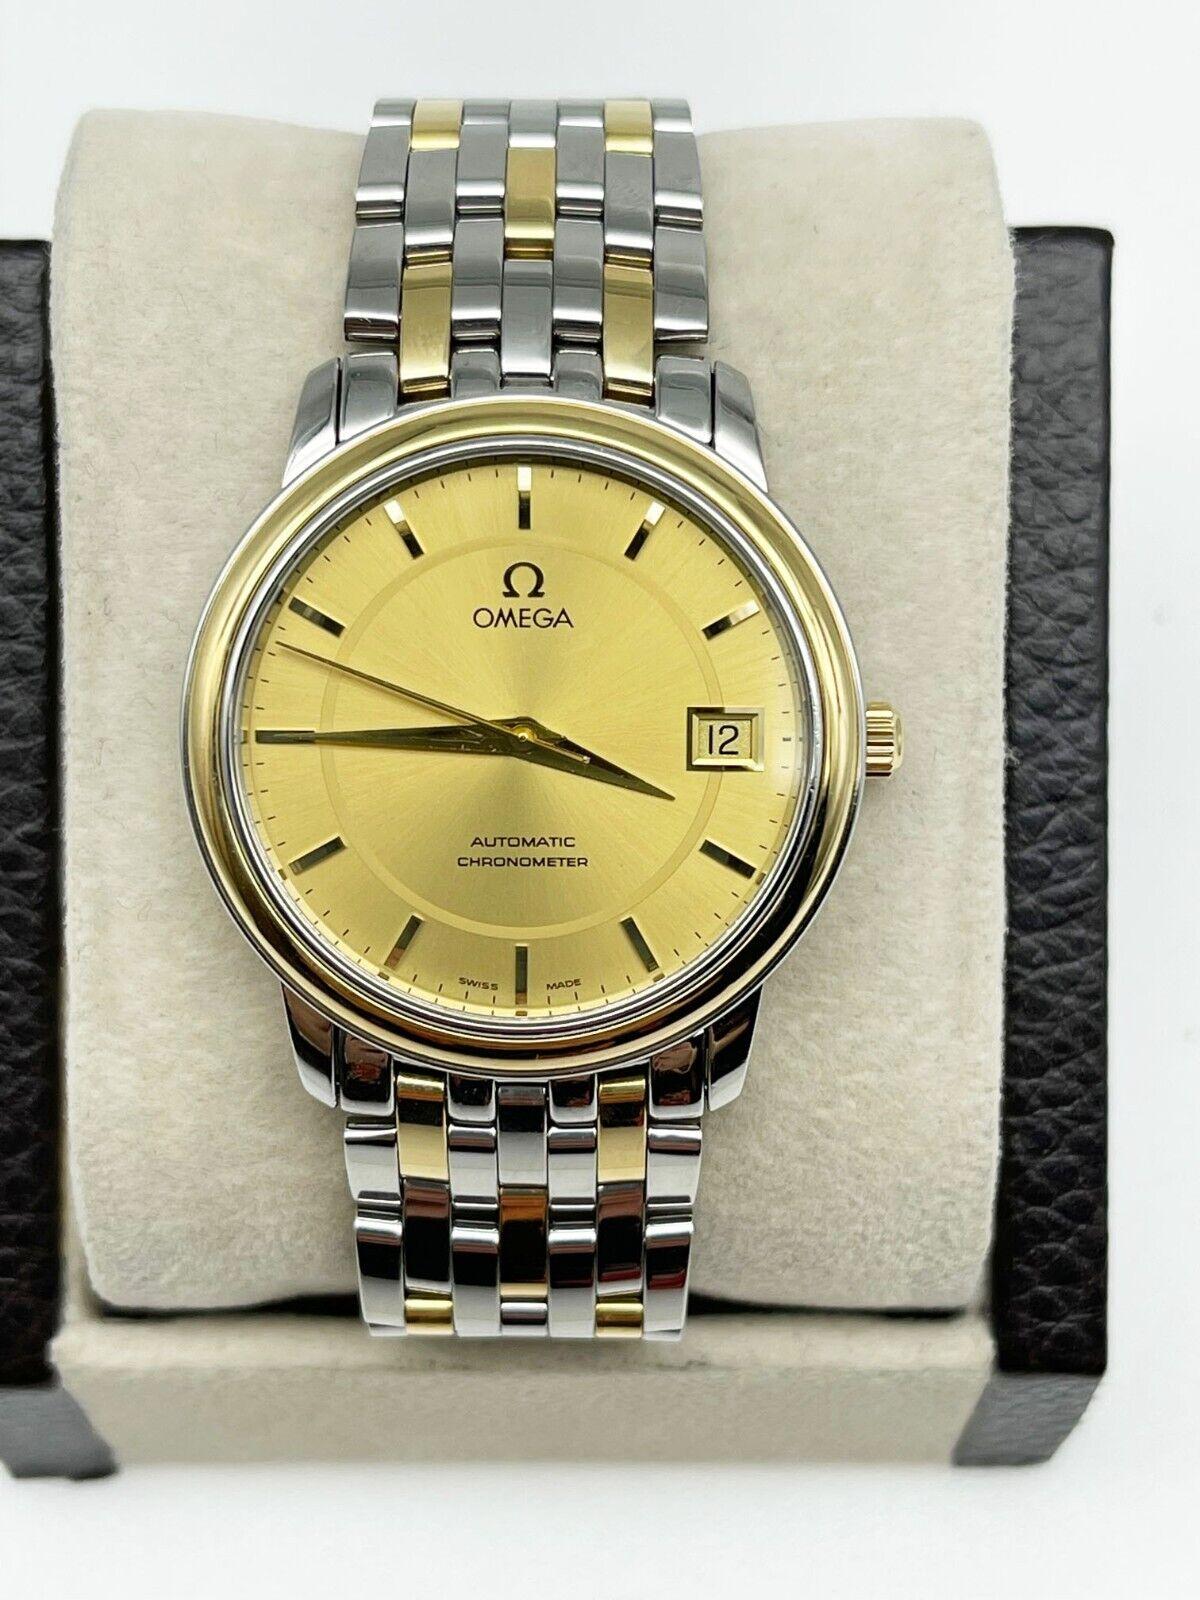 Style Number: 4300.11.00
Serial: 80371***
Year: 2005
Model: De Ville
Case Material: Stainless Steel 
Band: 18K Yellow Gold and Stainless Steel
Bezel: 18K Yellow Gold
Dial: Champagne
Face: Sapphire Crystal
Case Size: 34.7mm

Includes: 

-Omega Box,